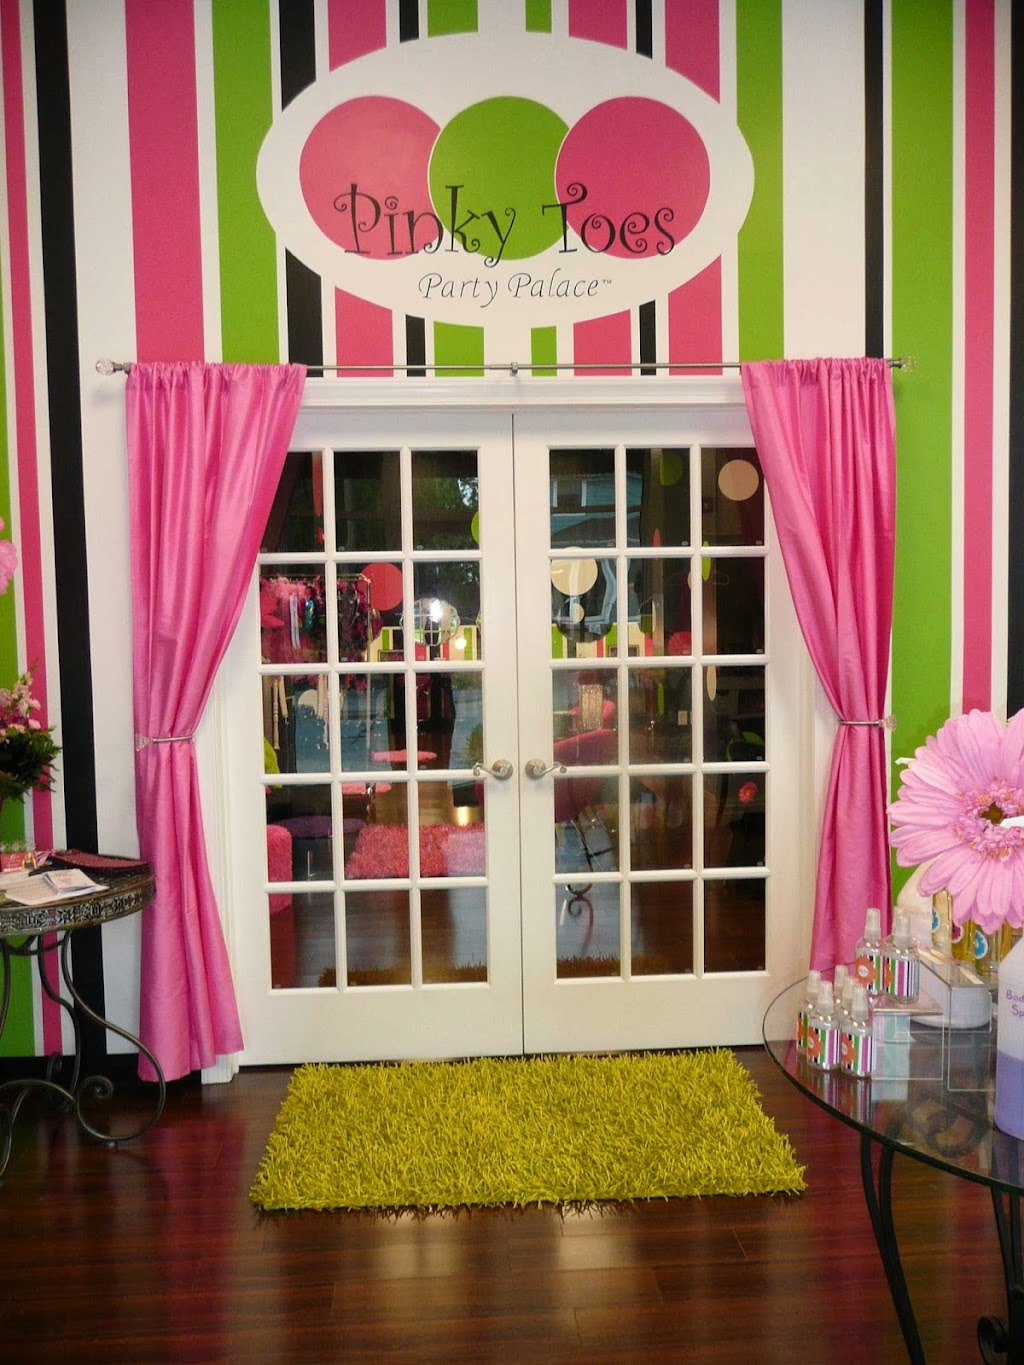 Pinky Toes Party Palace | 1240 Route 130 South, Suite 5 Bottoni Plaza, Robbinsville Twp, NJ 08691 | Phone: (609) 920-9264